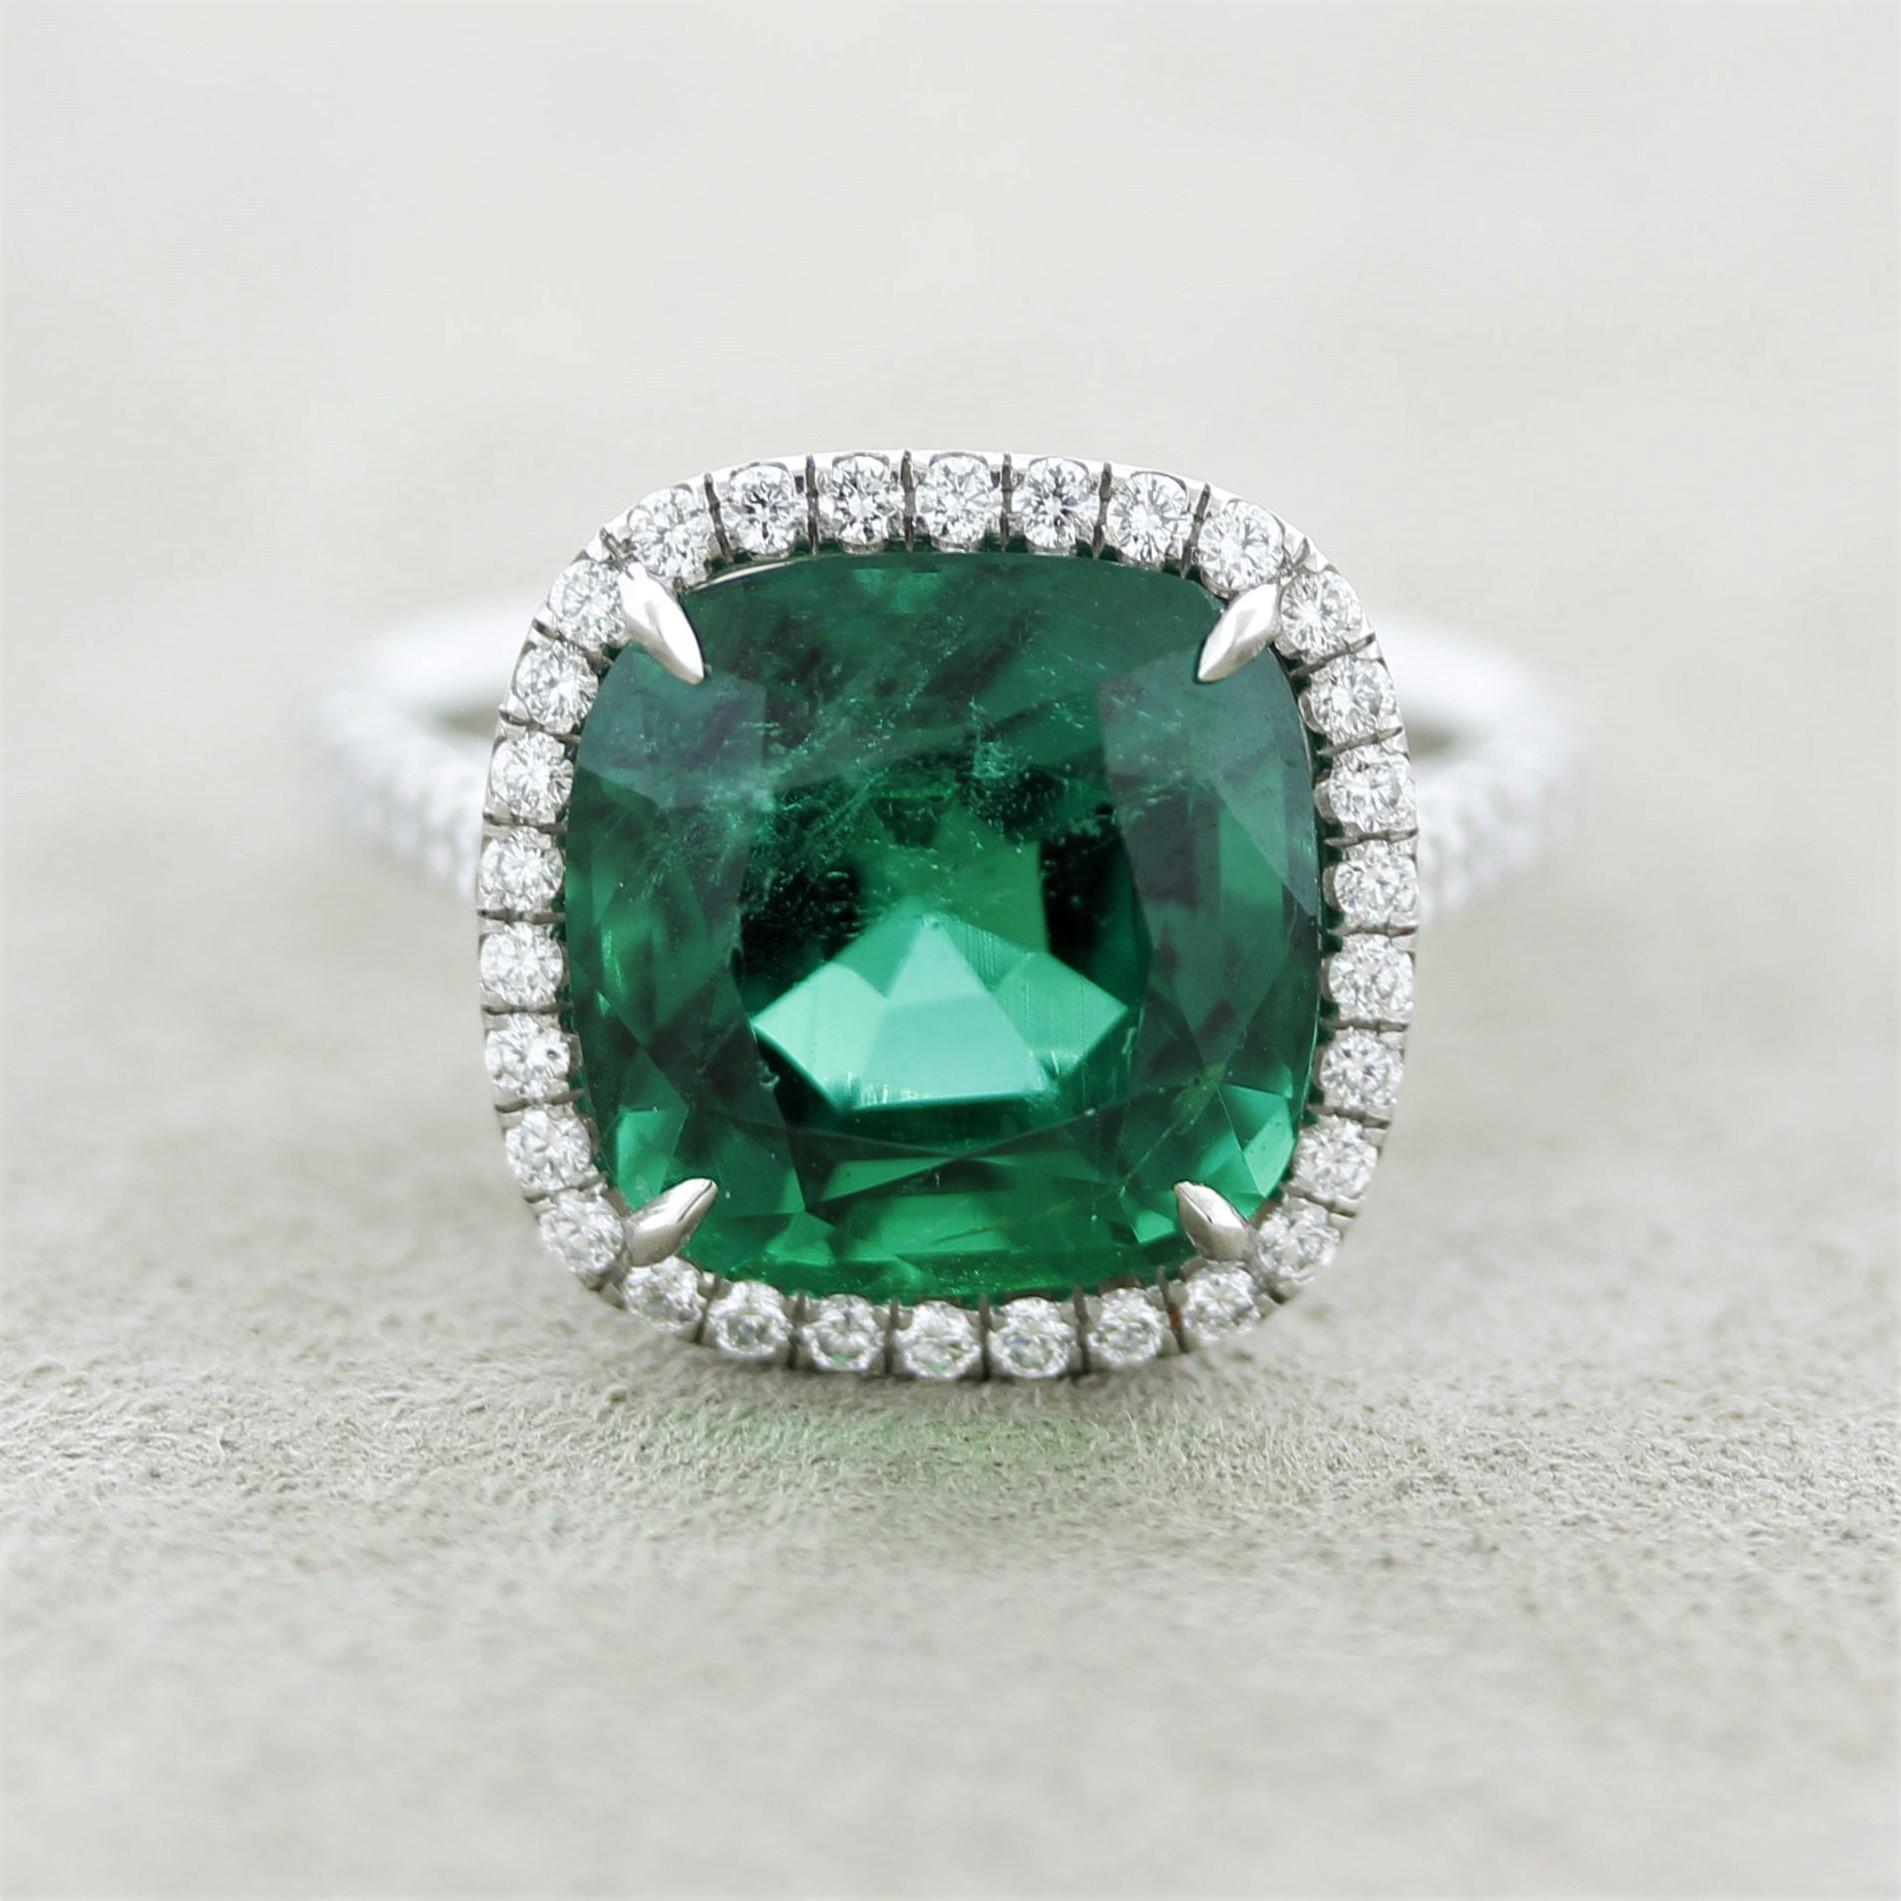 Simply out of the world, this emerald is one of the finest we have seen in the last few years. It weighs an impressive 6.31 carats but what makes the stone special is its intense vivid green color. It is so rich and bright, a difficult combination